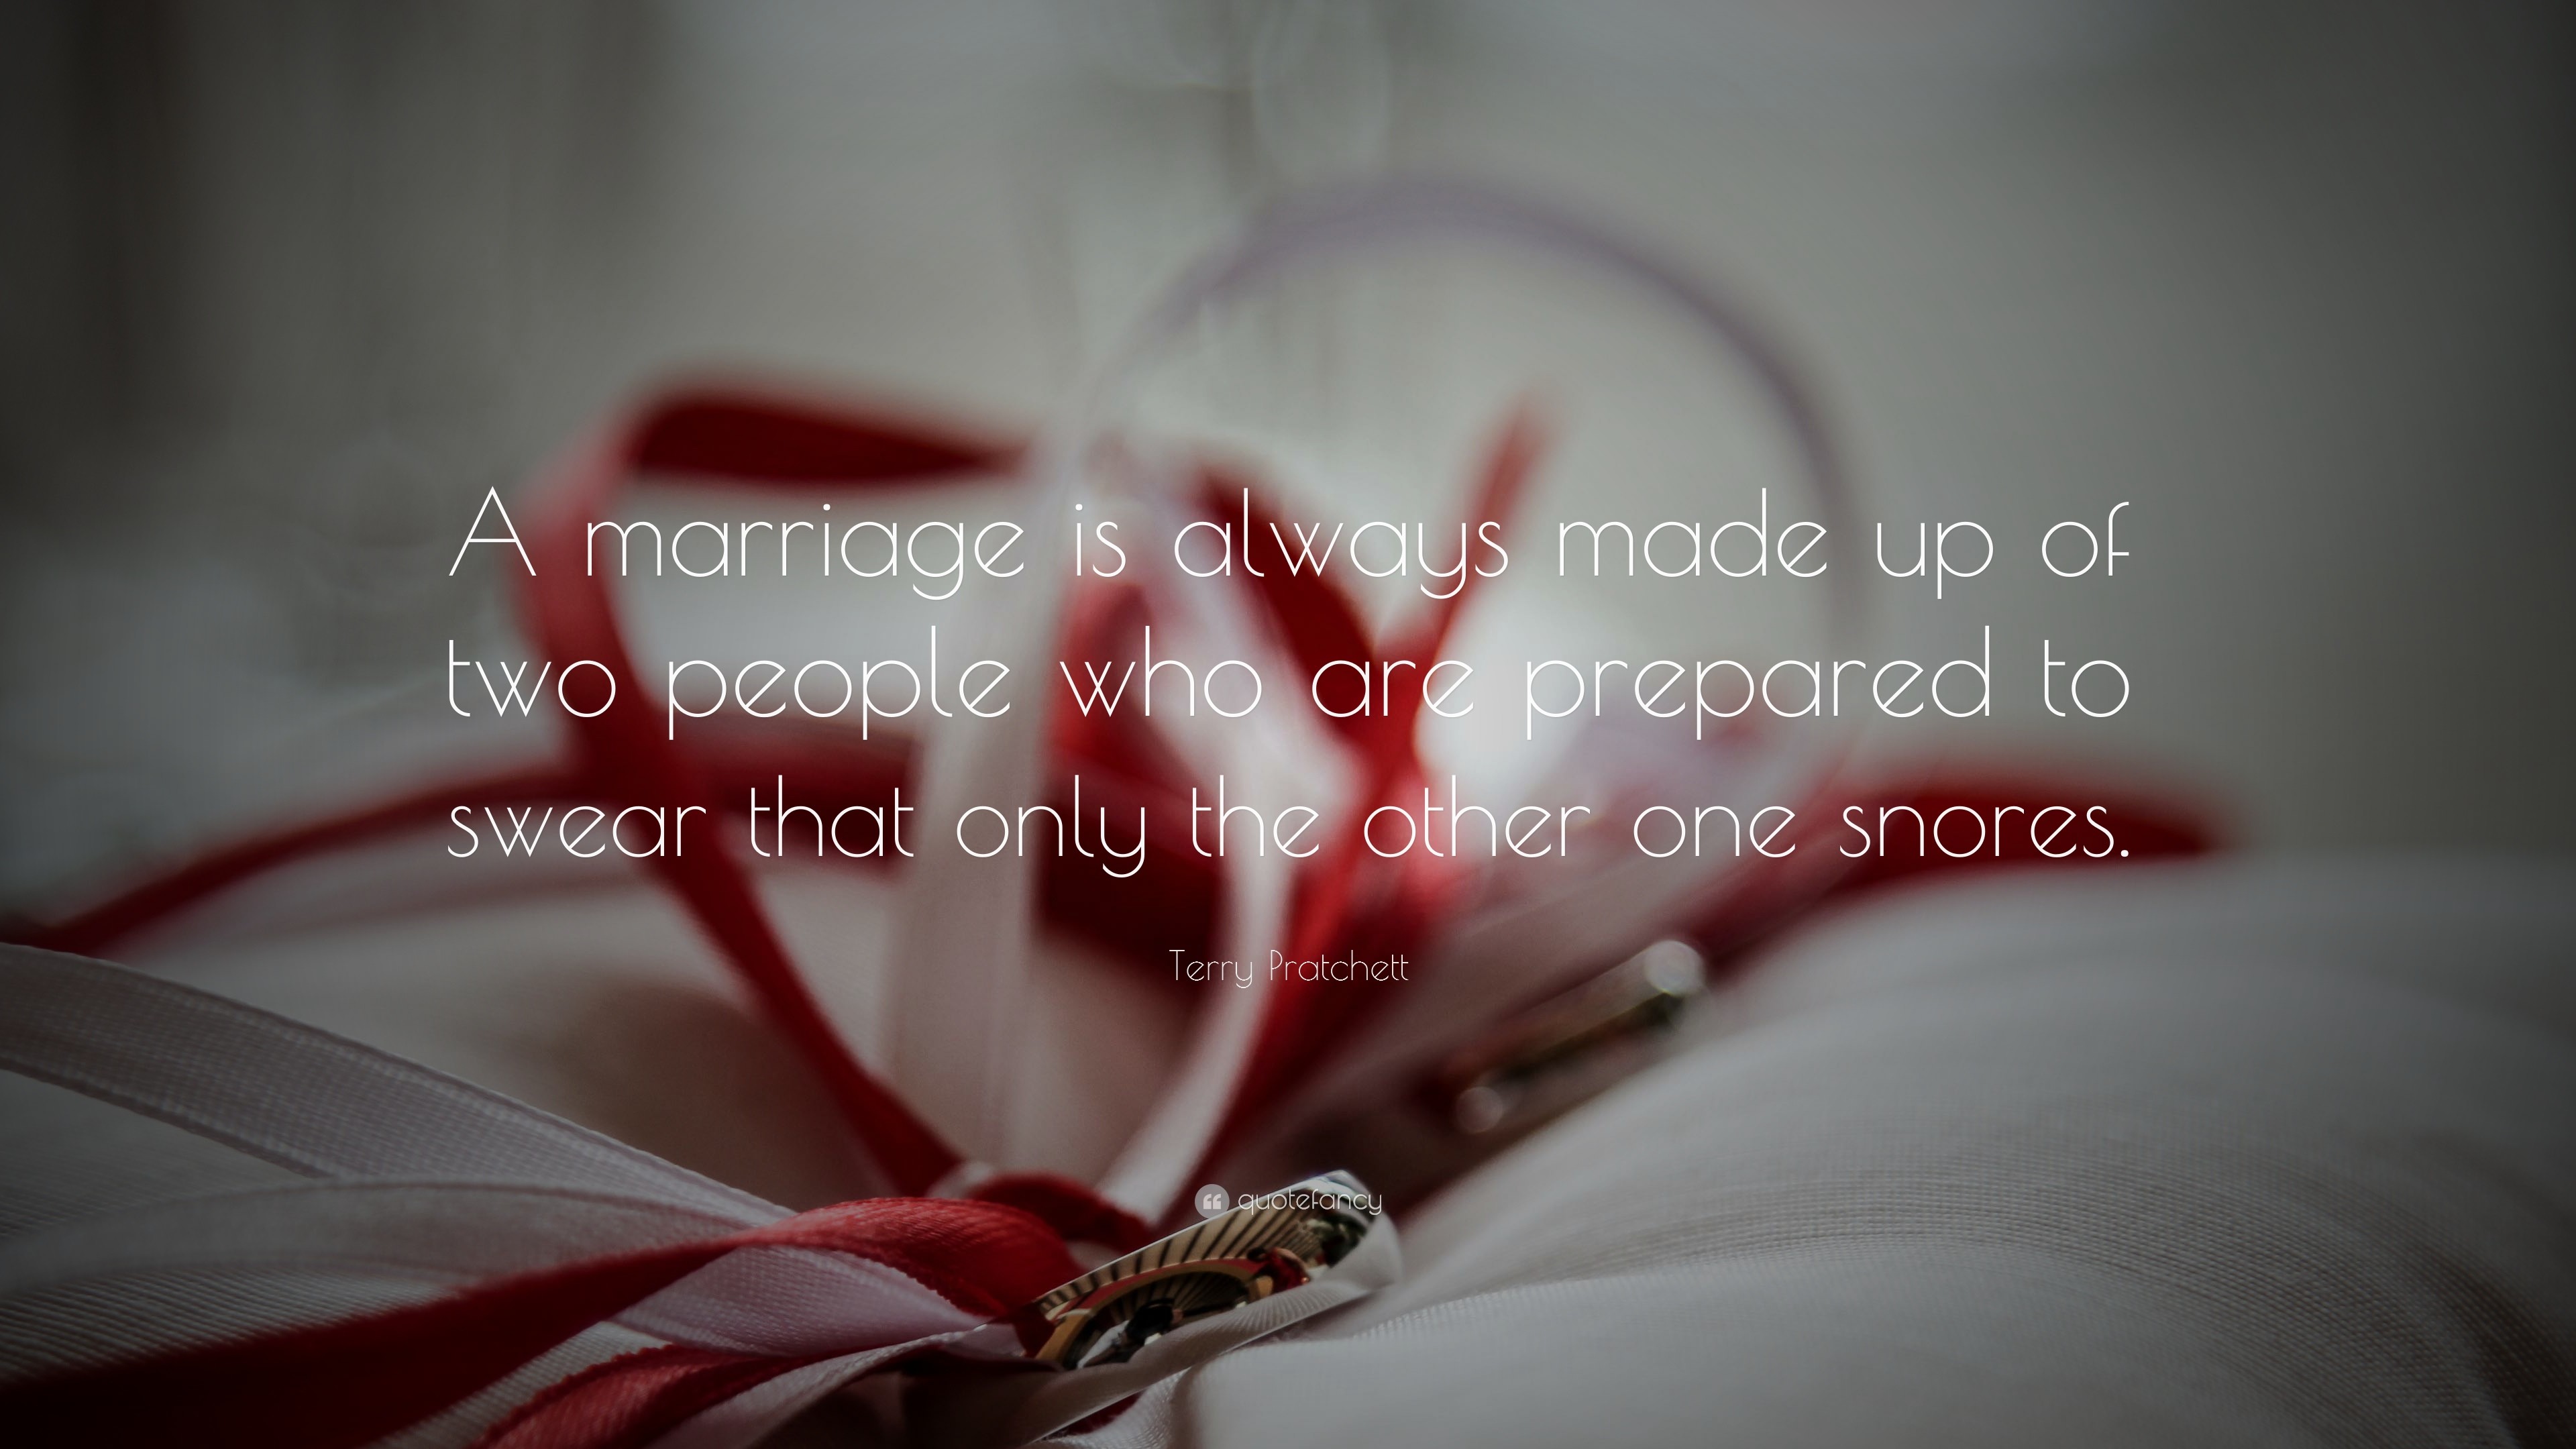 3840x2160 Marriage Quotes: “A marriage is always made up of two people who are  prepared